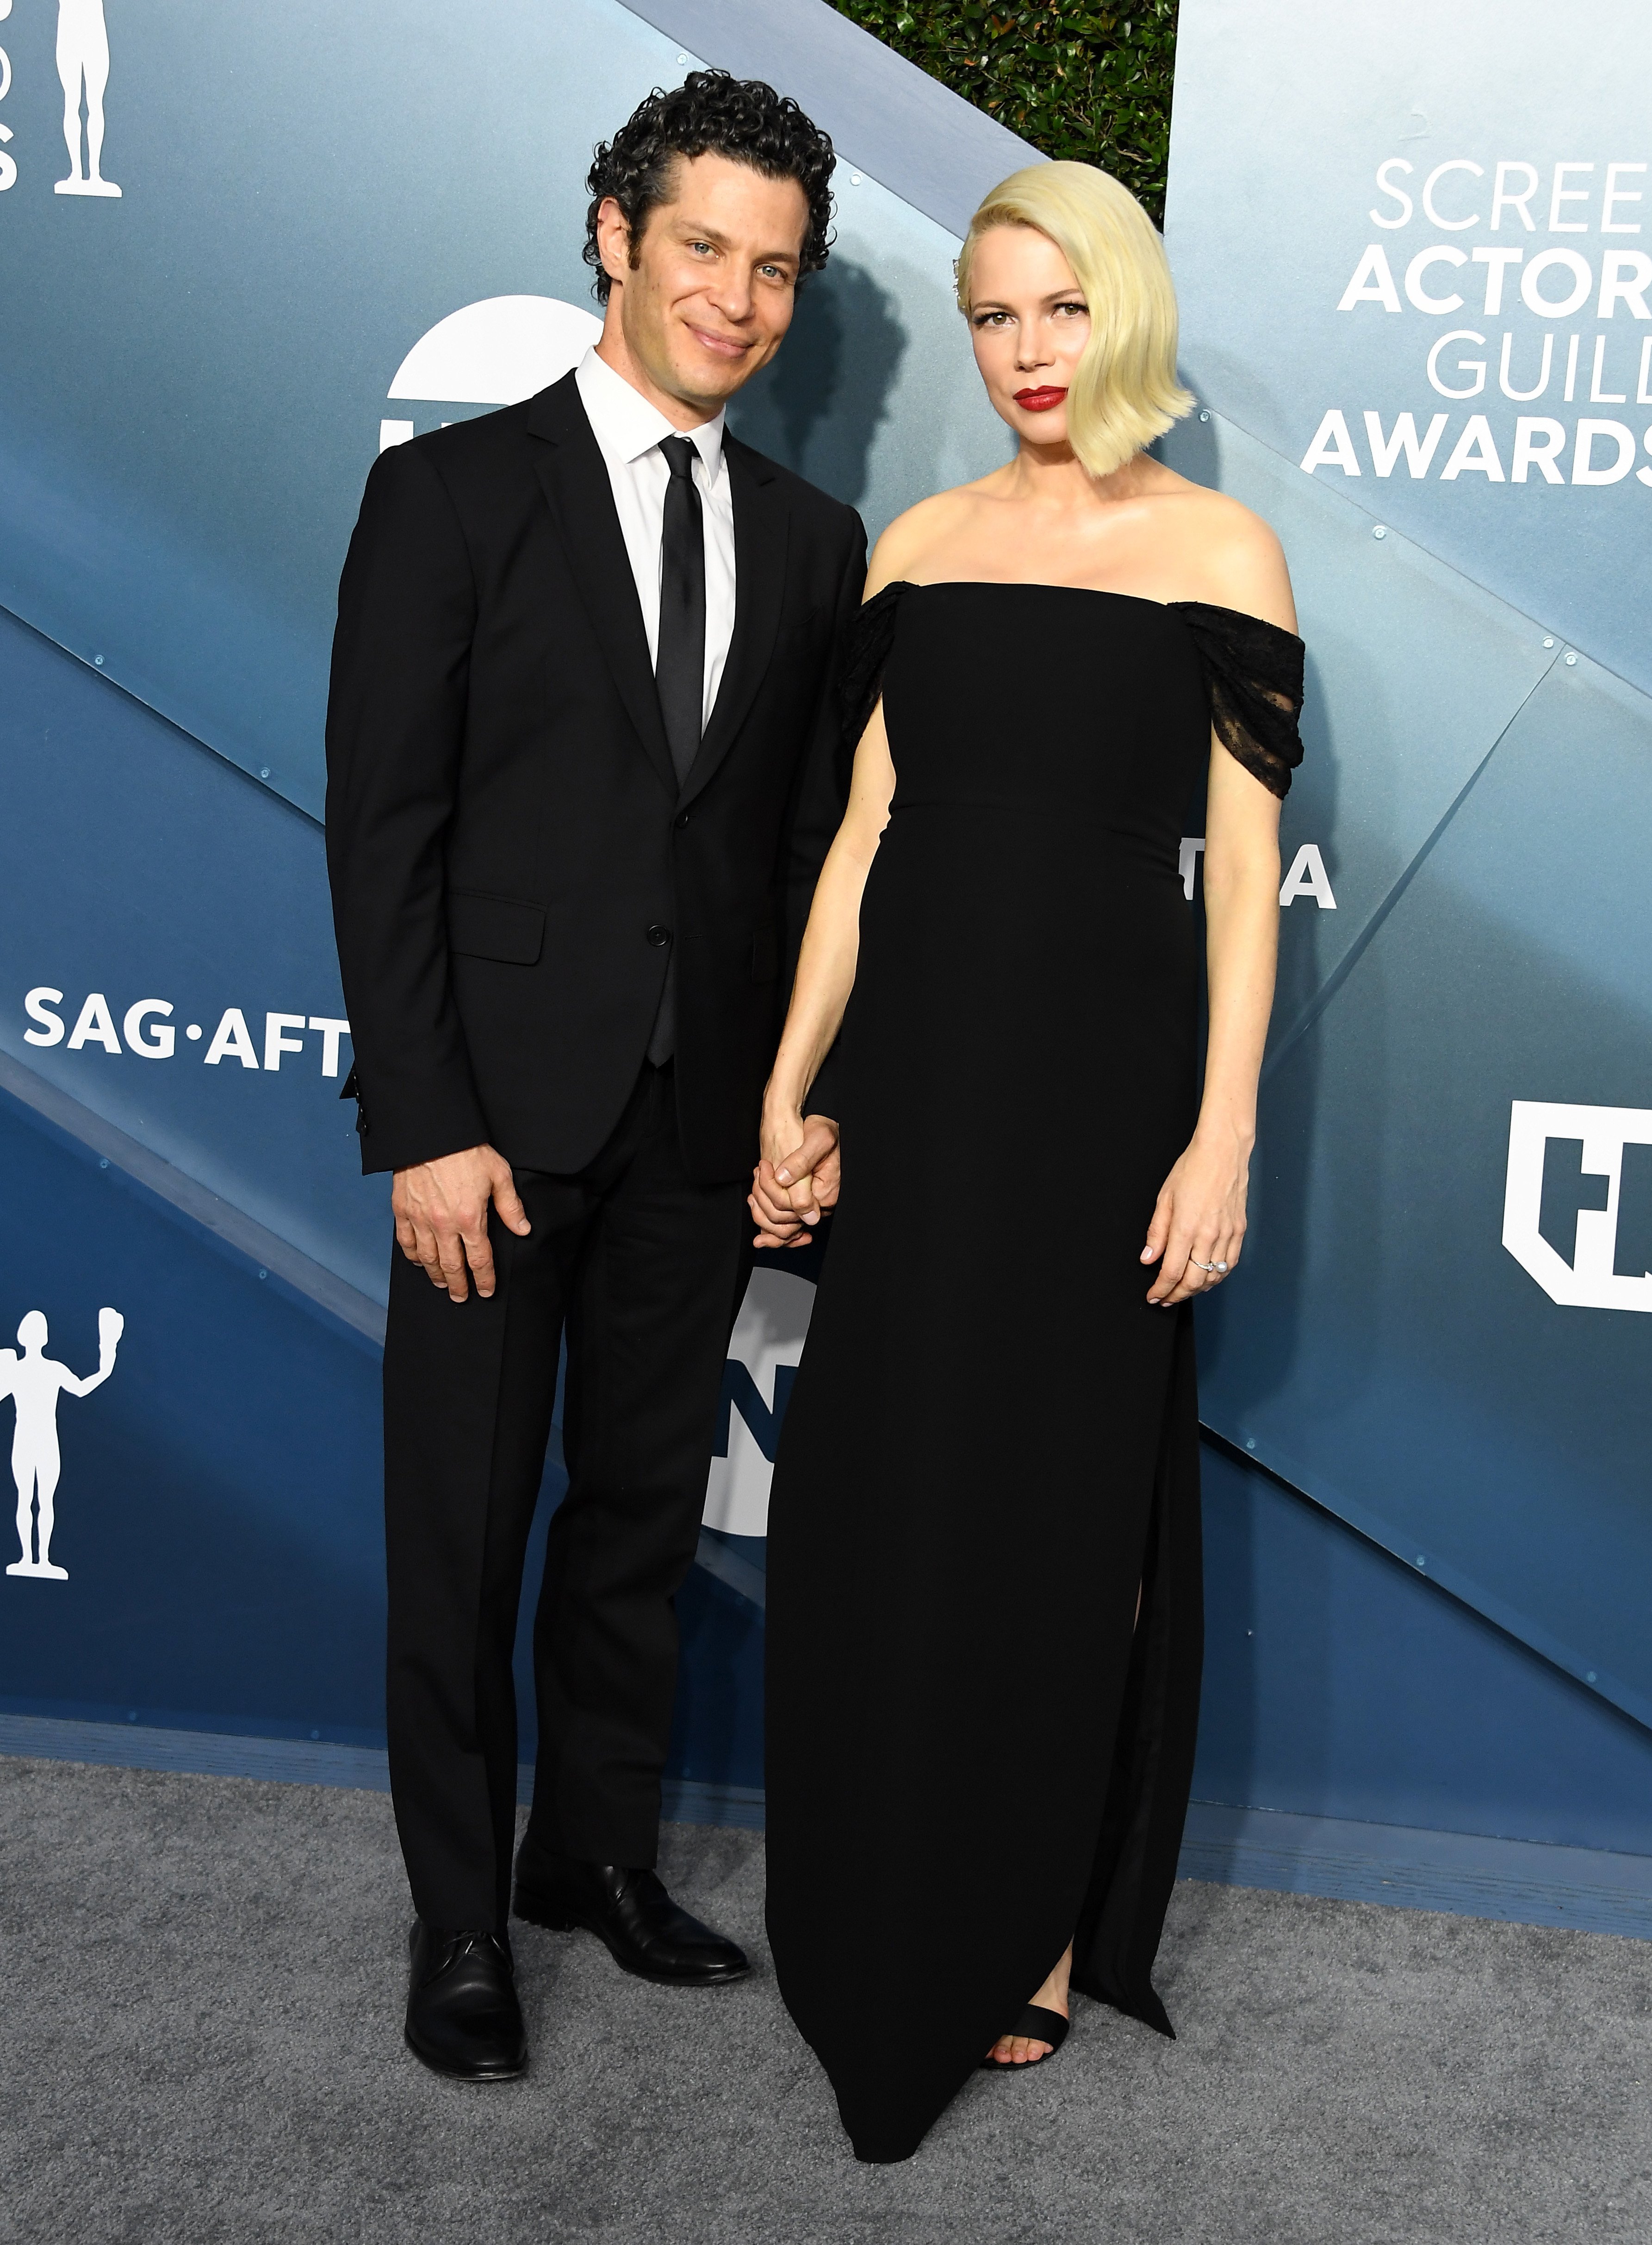 Thomas Kail and Michelle Williams arrives at the 26th Annual Screen Actors Guild Awards at The Shrine Auditorium on January 19, 2020 in Los Angeles, California. | Source: Getty Images